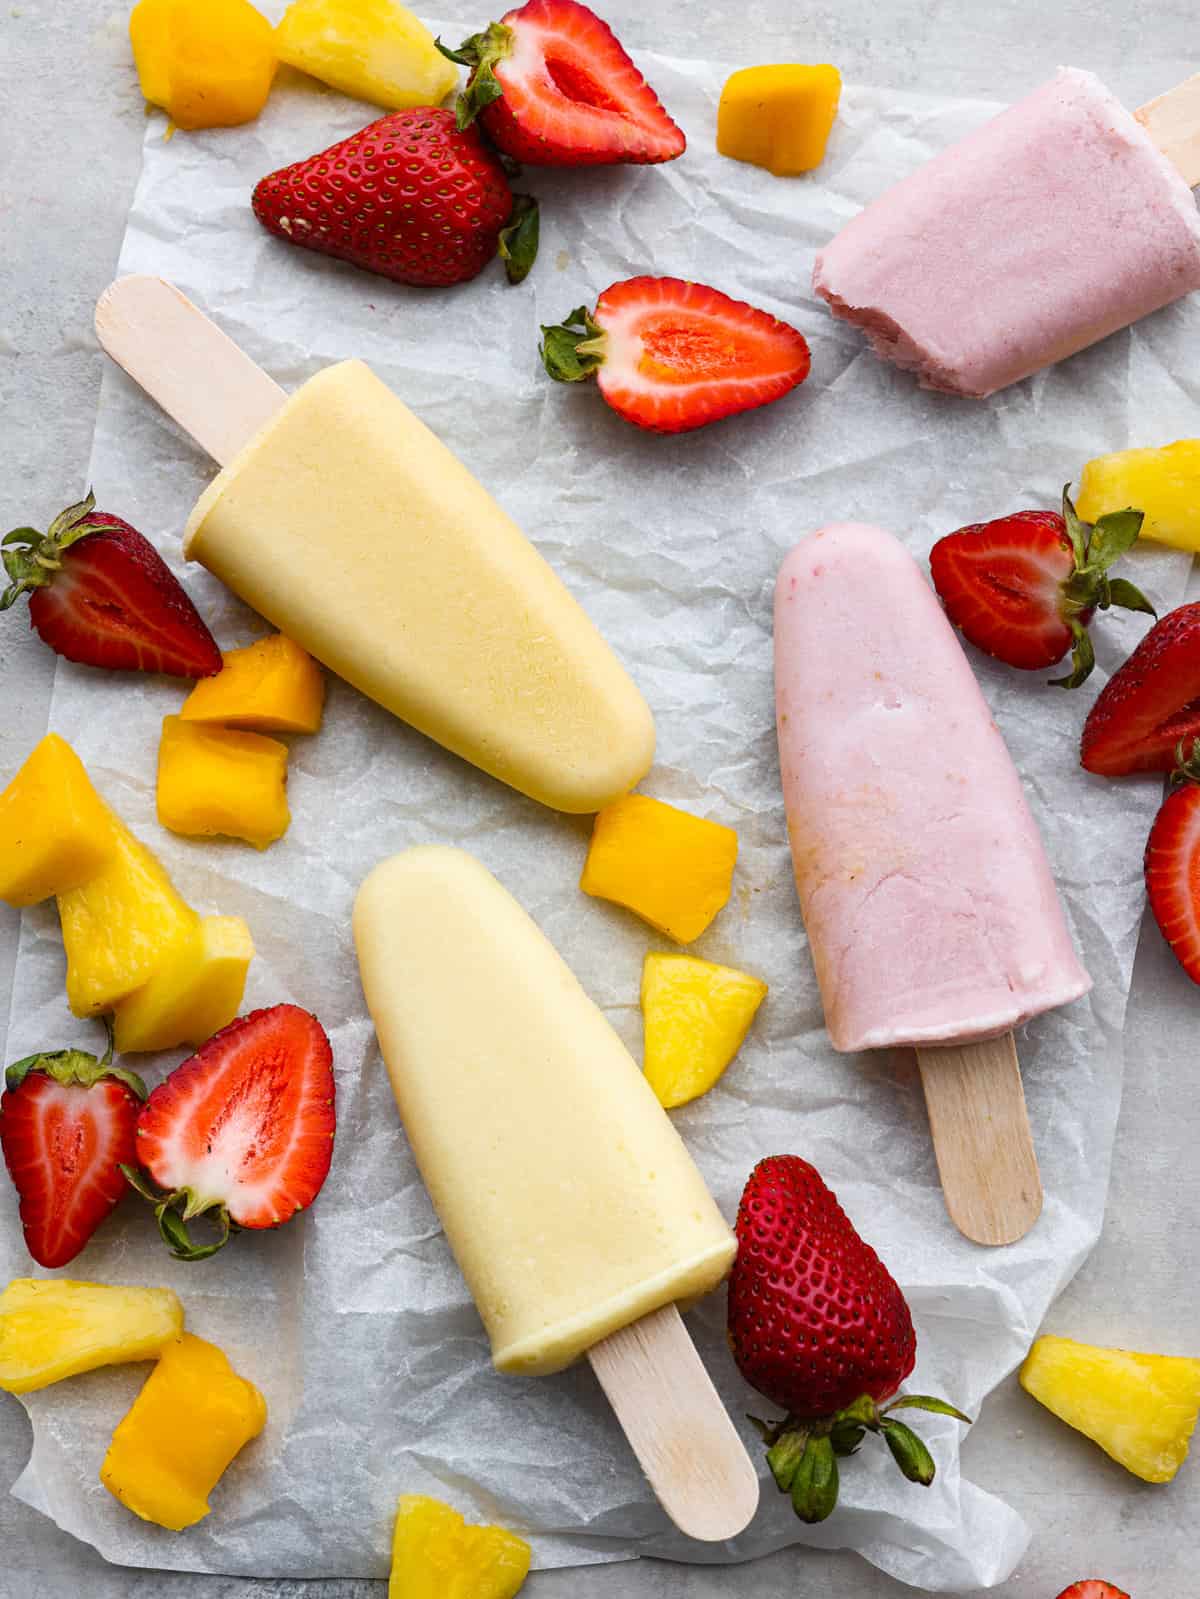 Make the Coolest Treats with the Best Popsicle Molds of 2022